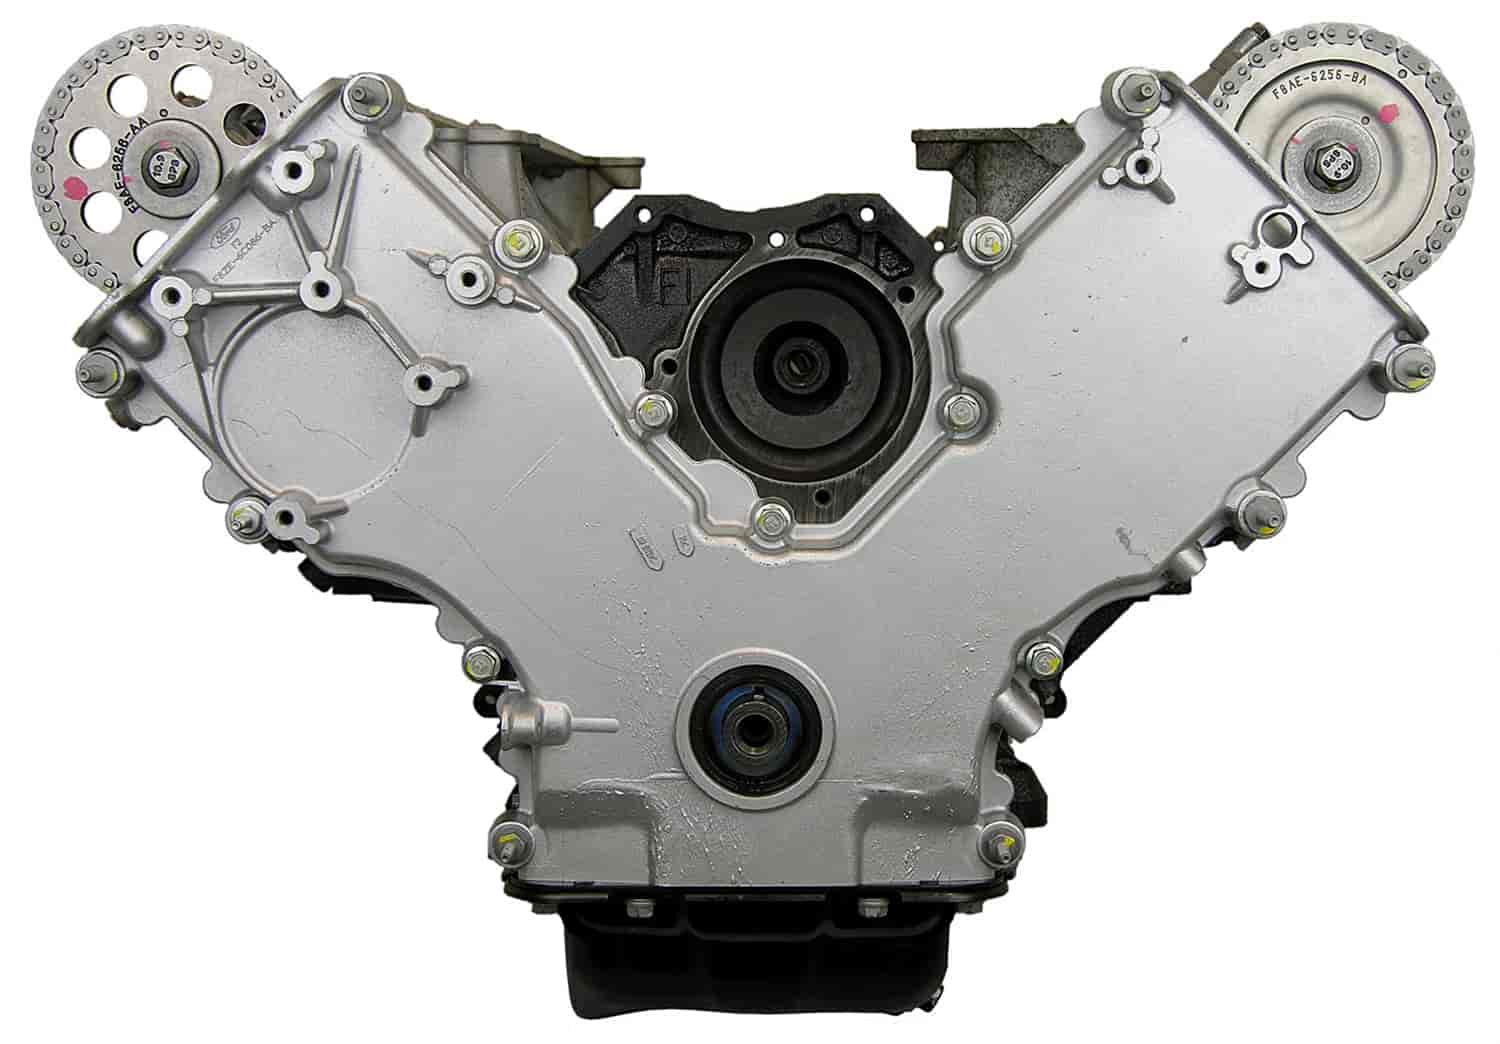 Remanufactured Crate Engine for 1996-1997 Ford Thunderbird &